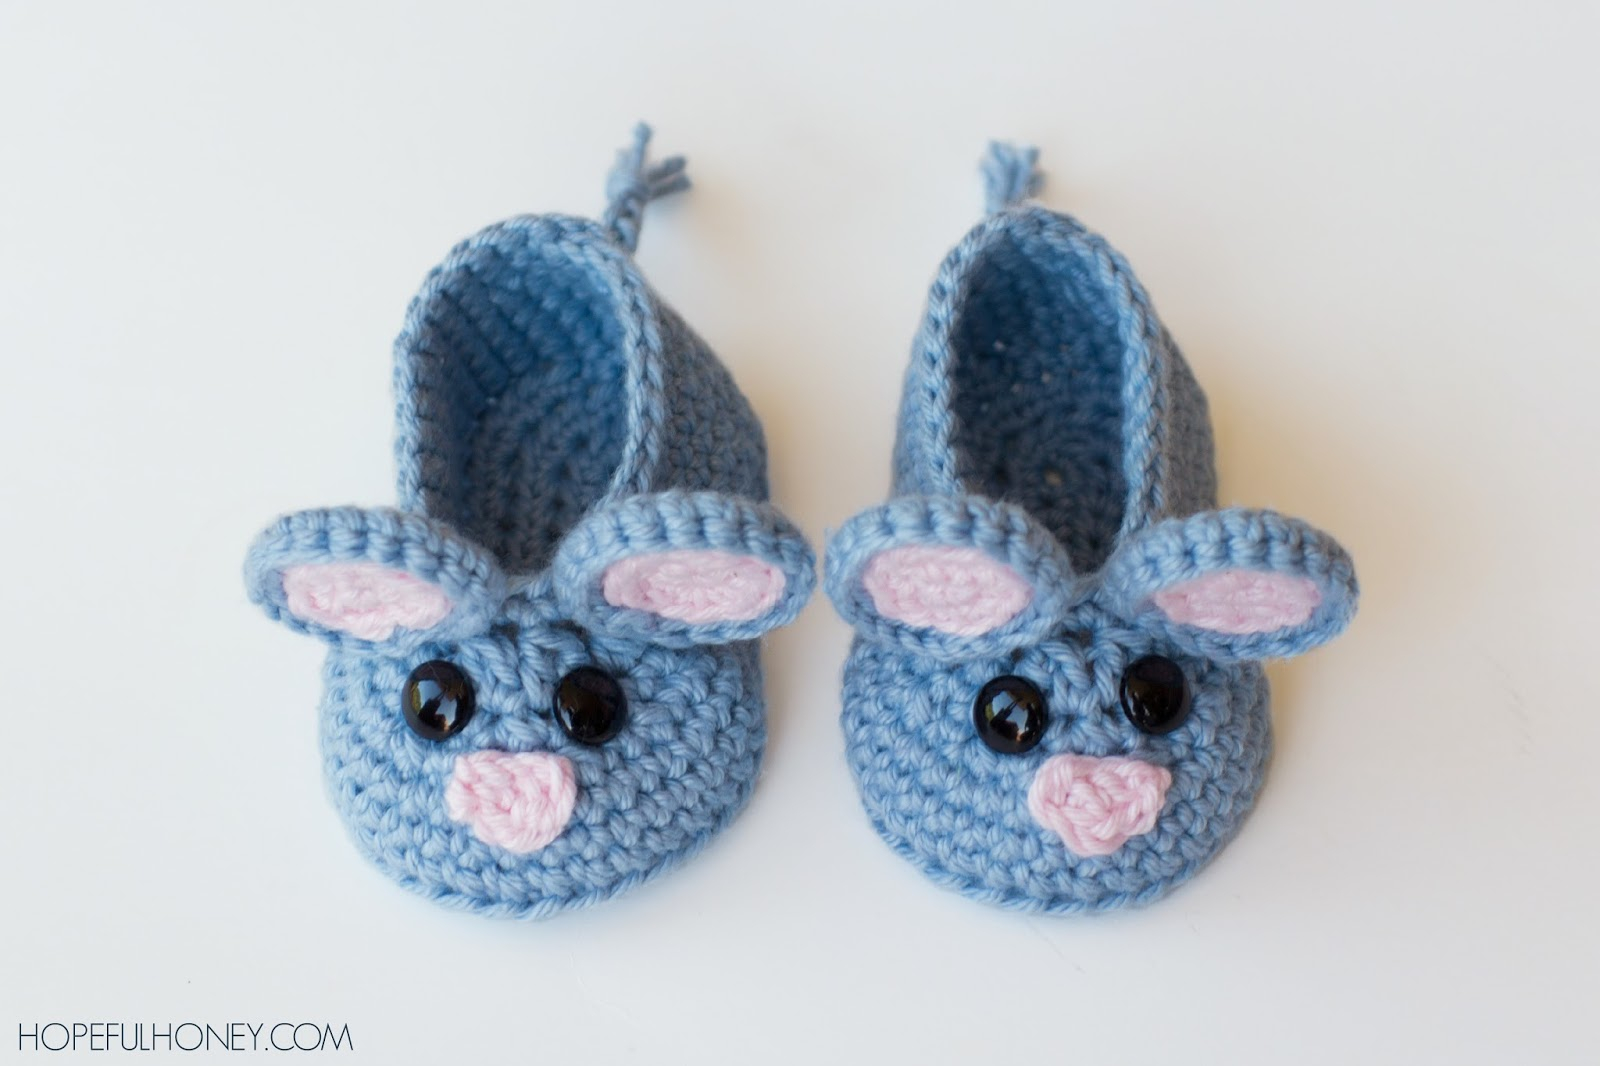 Crochet Baby Booties Pattern Crochet Ba Animal Booties With Free Patterns